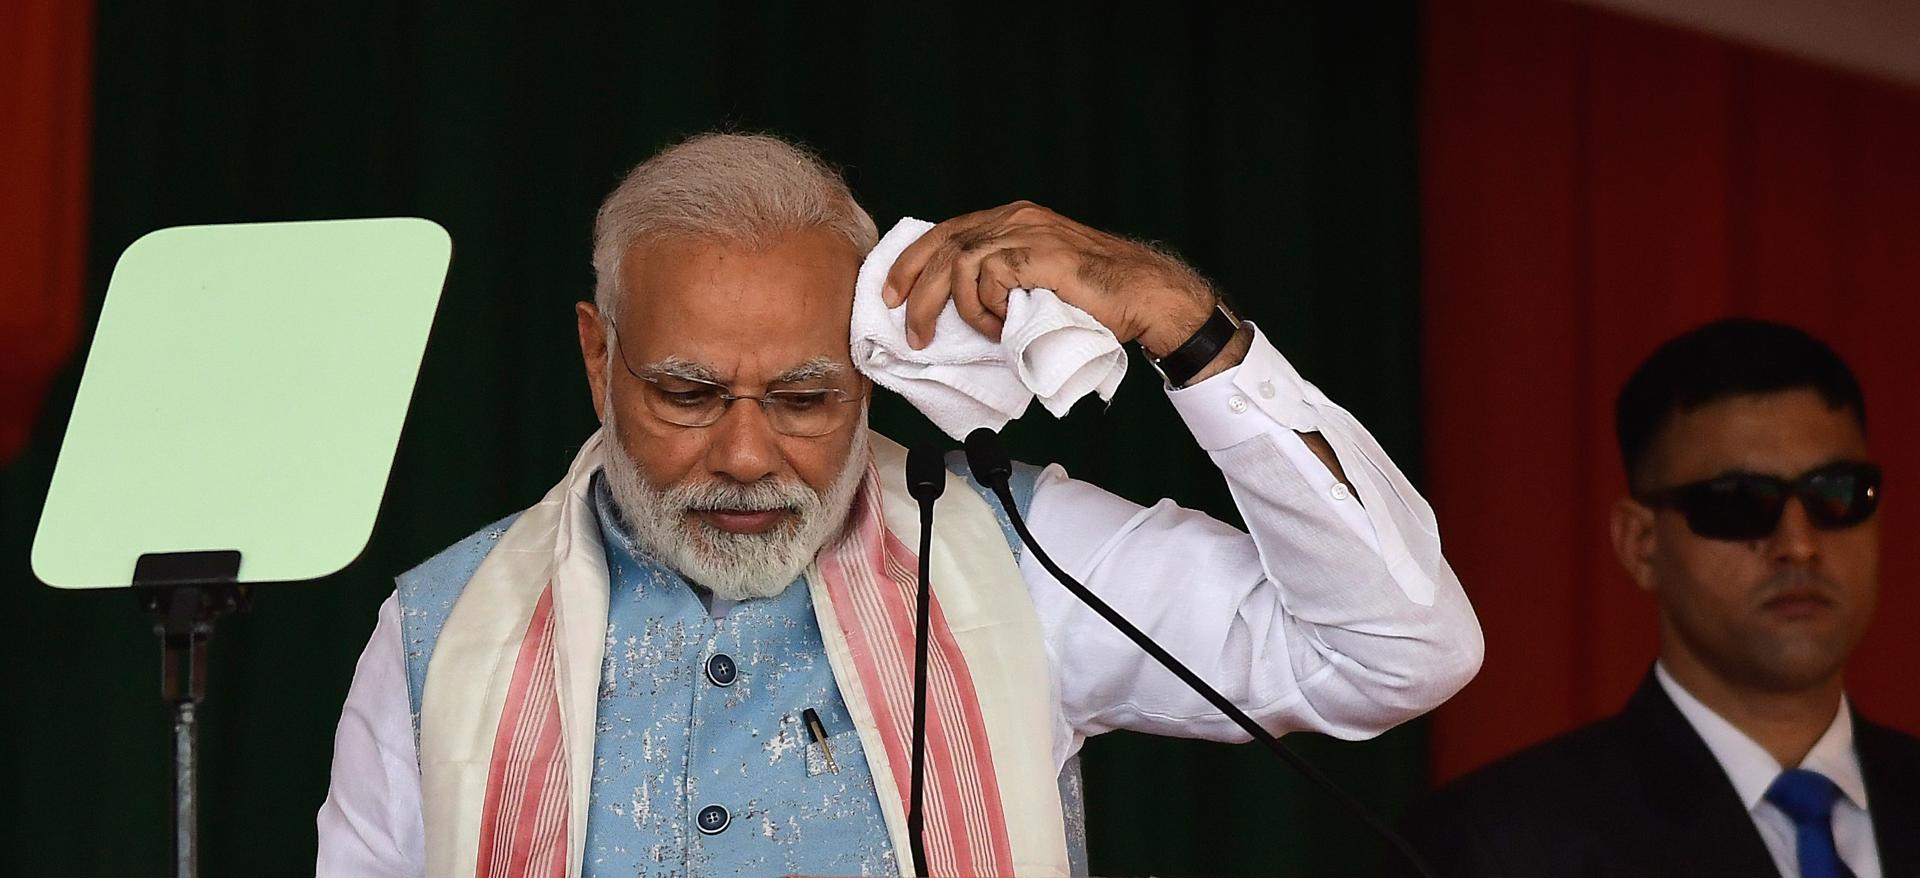 Indian Prime Minister Narendra Modi gestures while addressing a public rally in Chagchari in Kamrup (rural) district of Assam, India, 09 February 2019. EFE-EPA/FILE/STR